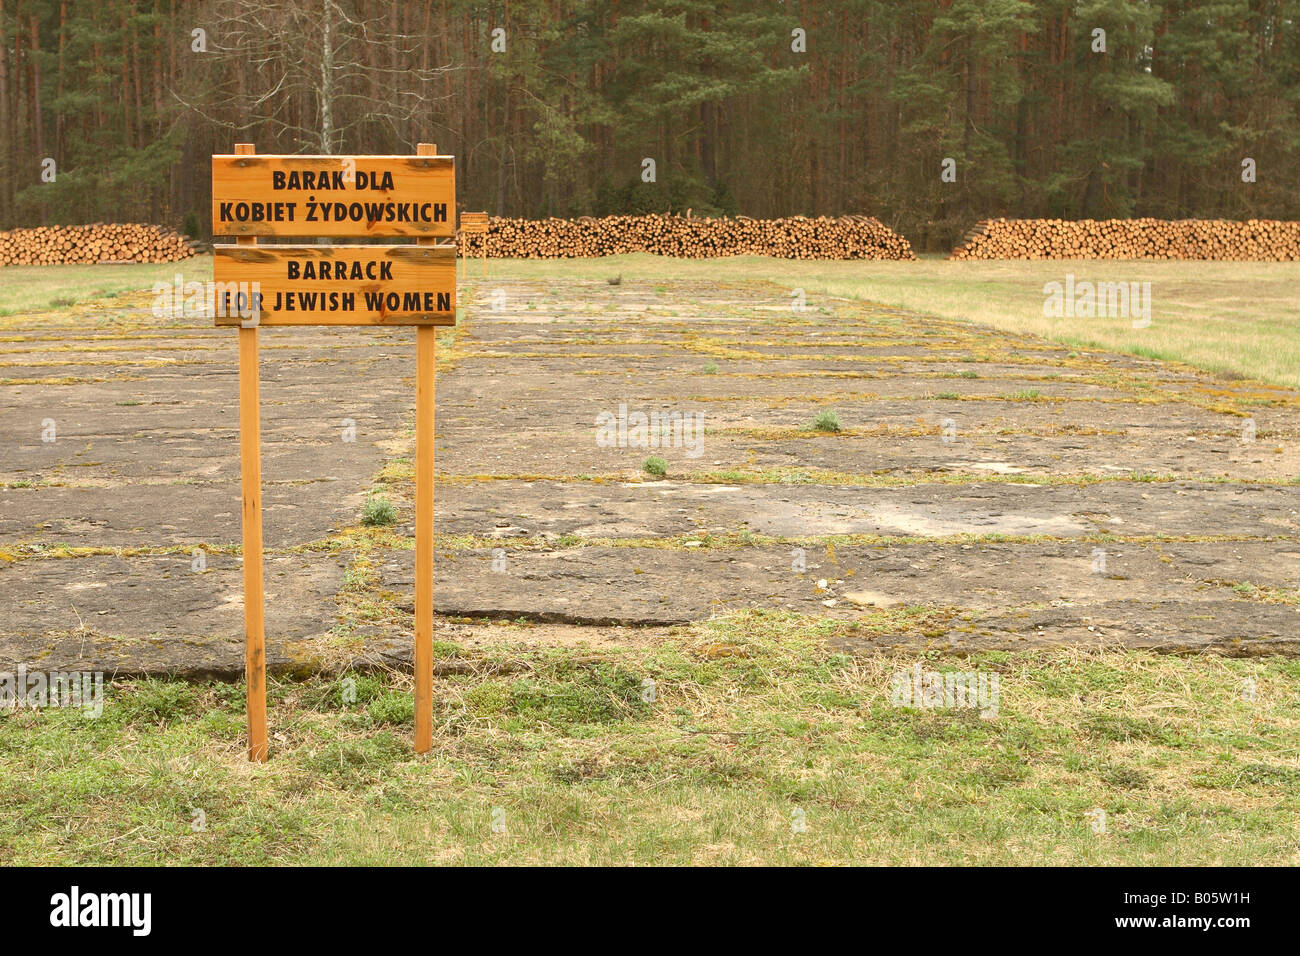 Treblinka Poland site of barracks for Jewish women prisoners at the penal forced labour work concentration camp Stock Photo